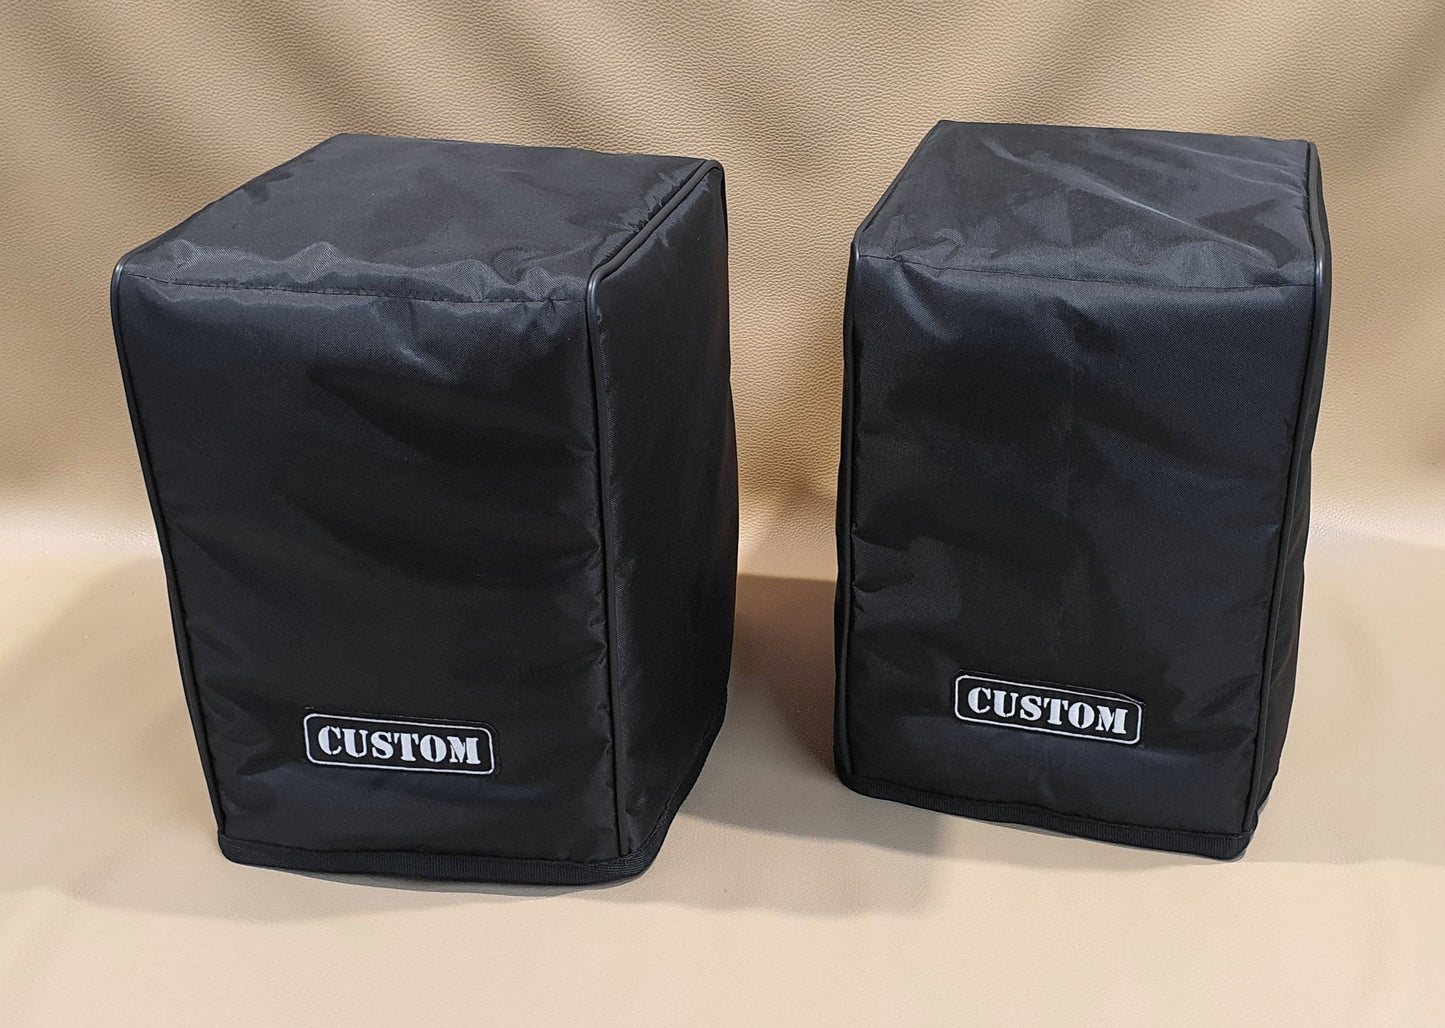 Custom padded cover for GENELEC 1037C (PAIR) - 2x Pieces